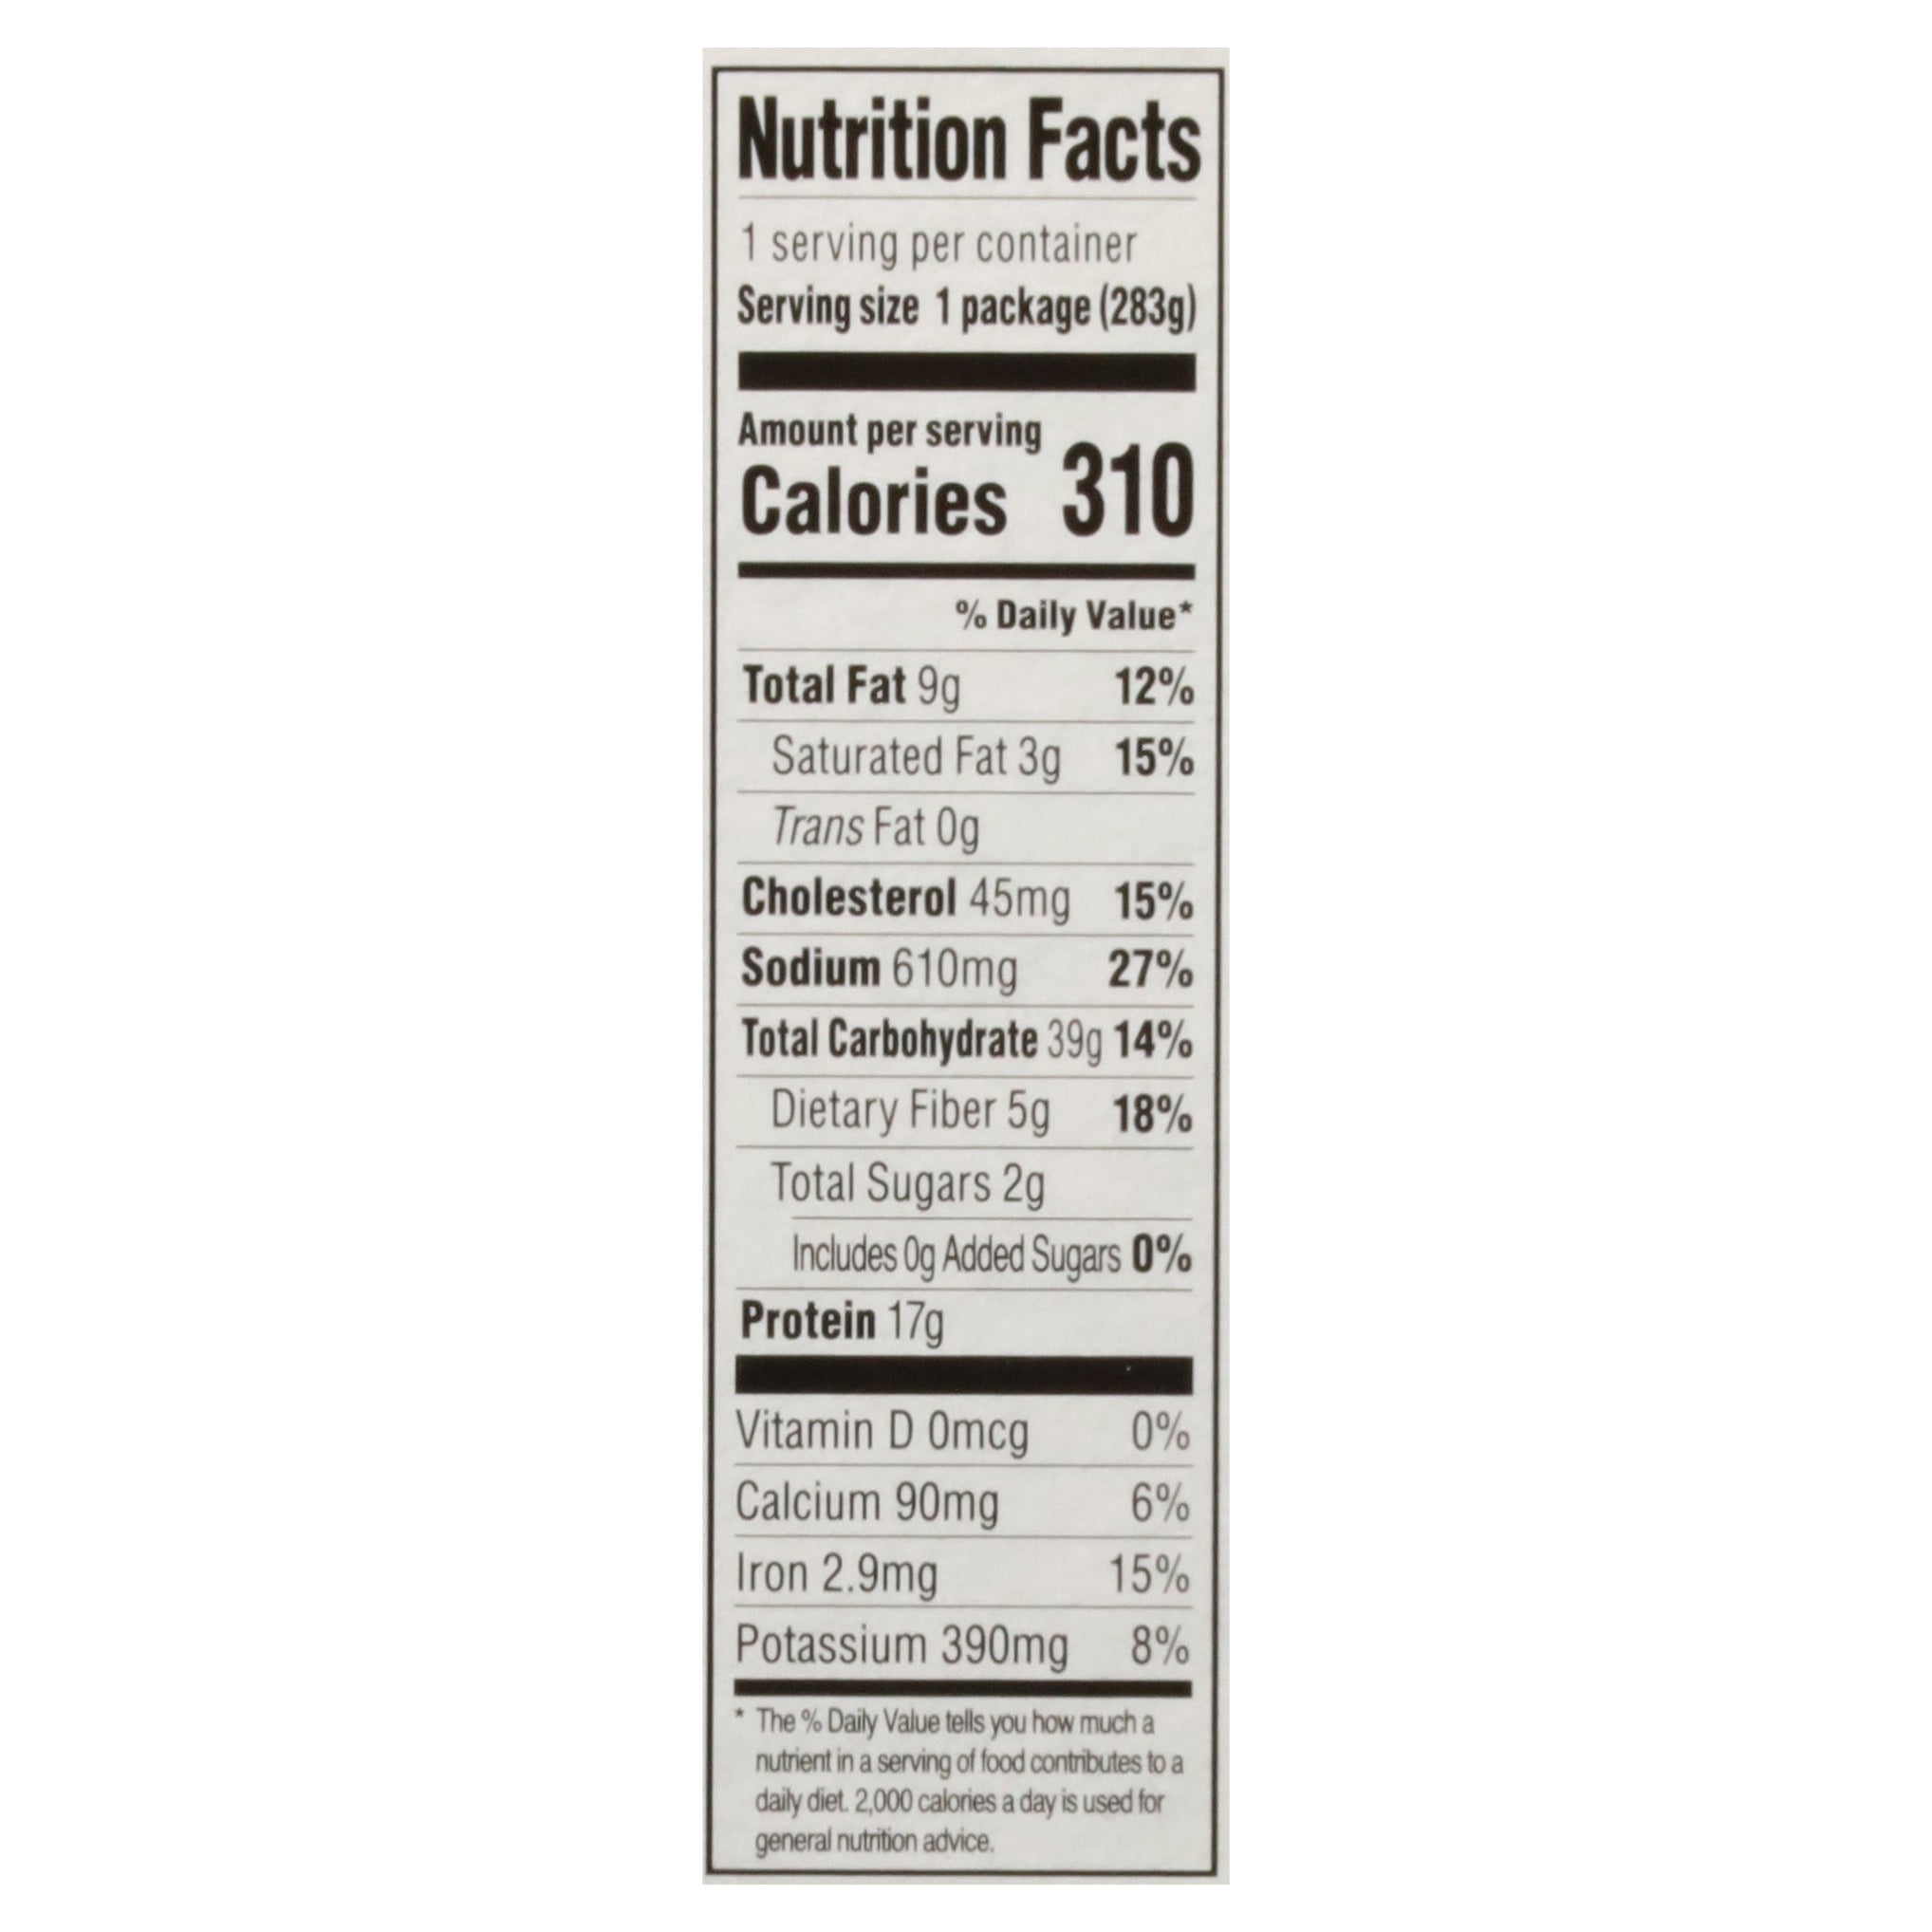 Nutrition Facts for Saffron Road Fire-Roasted Adobo Chicken. 310 calories, 9g fat, 610mg sodium, 39g carbs, 5g fiber, 17g protein per serving.